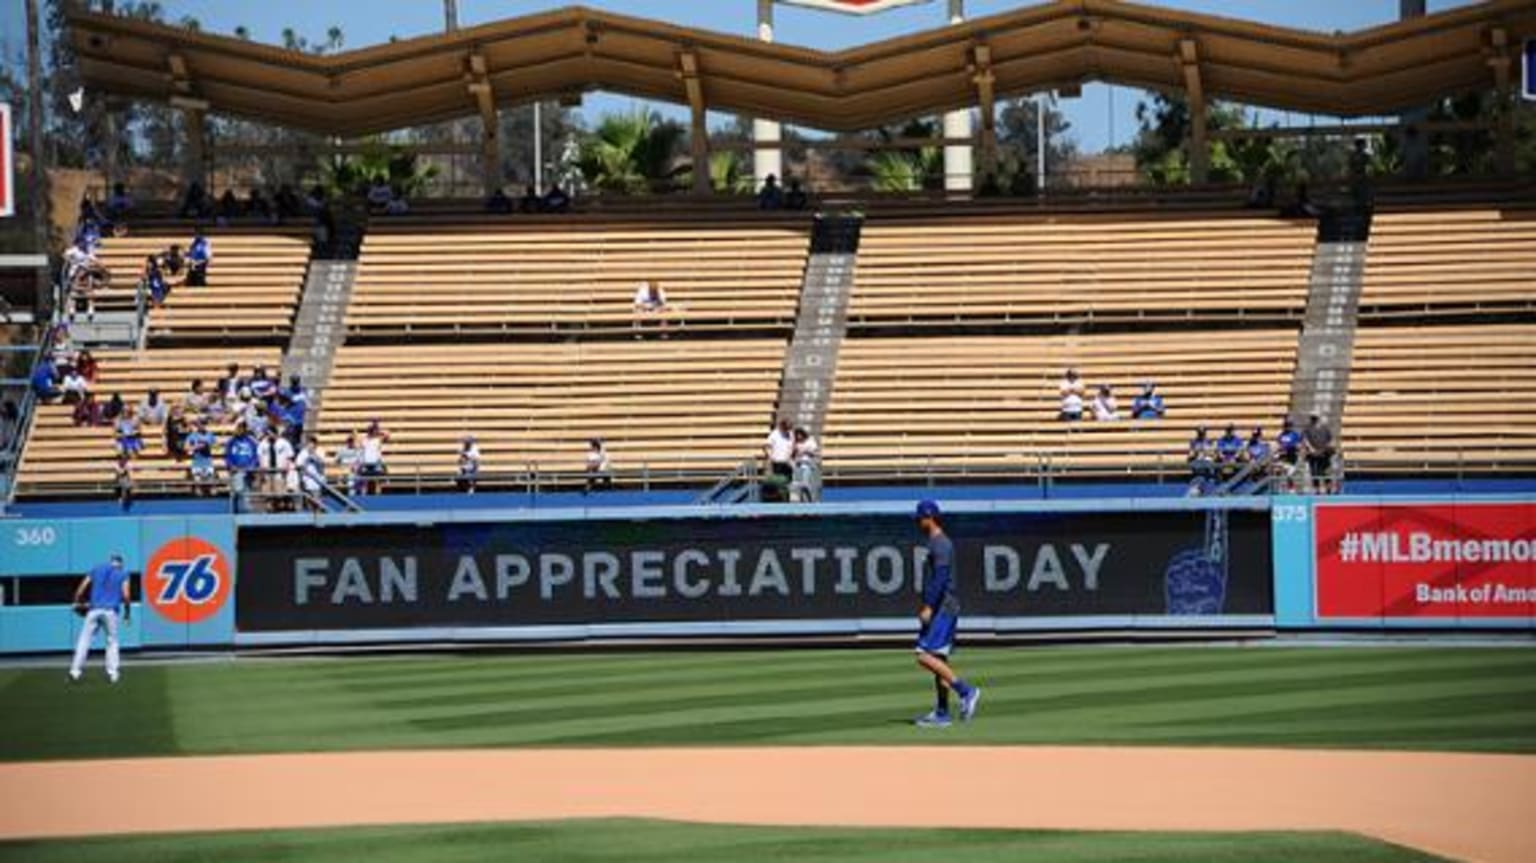 The Right Field Pavilion